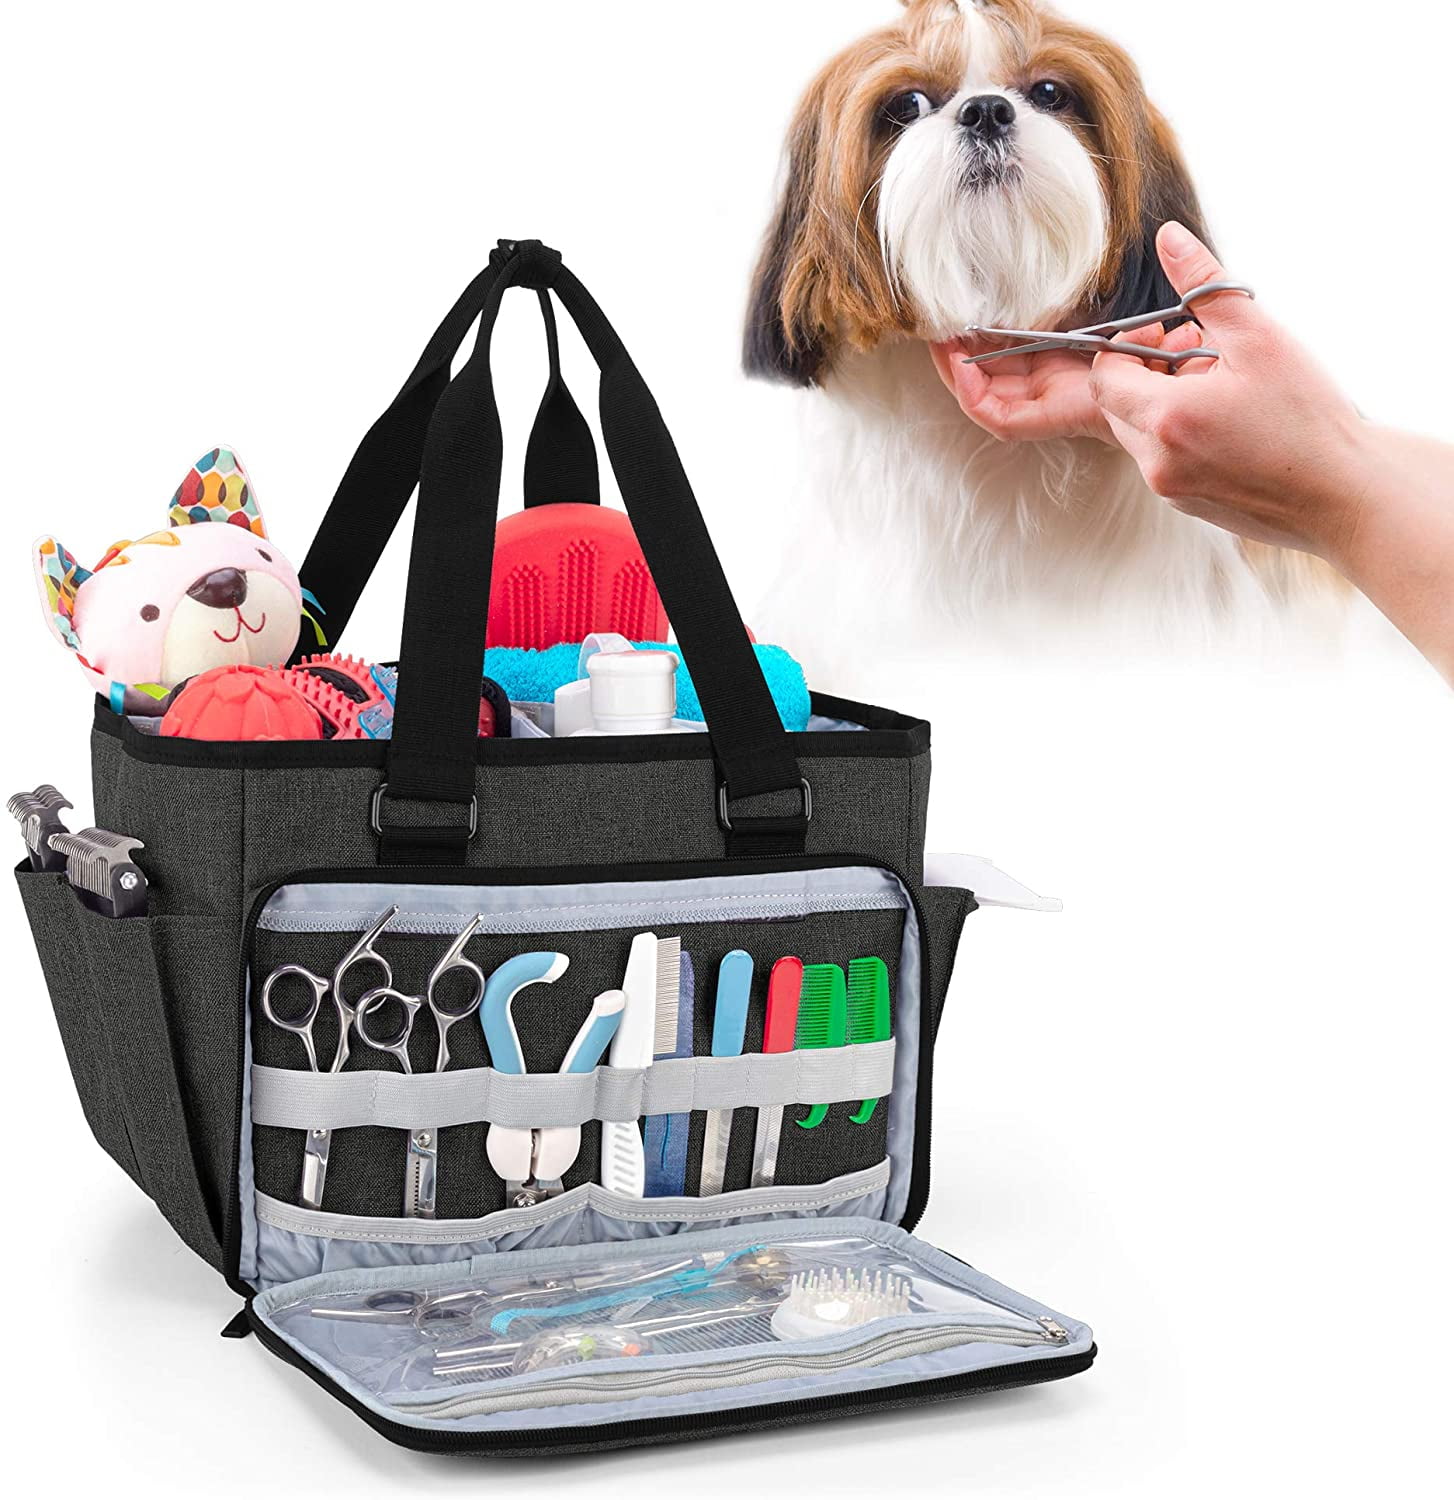 Best Dog Groomer Kit in the world The ultimate guide 